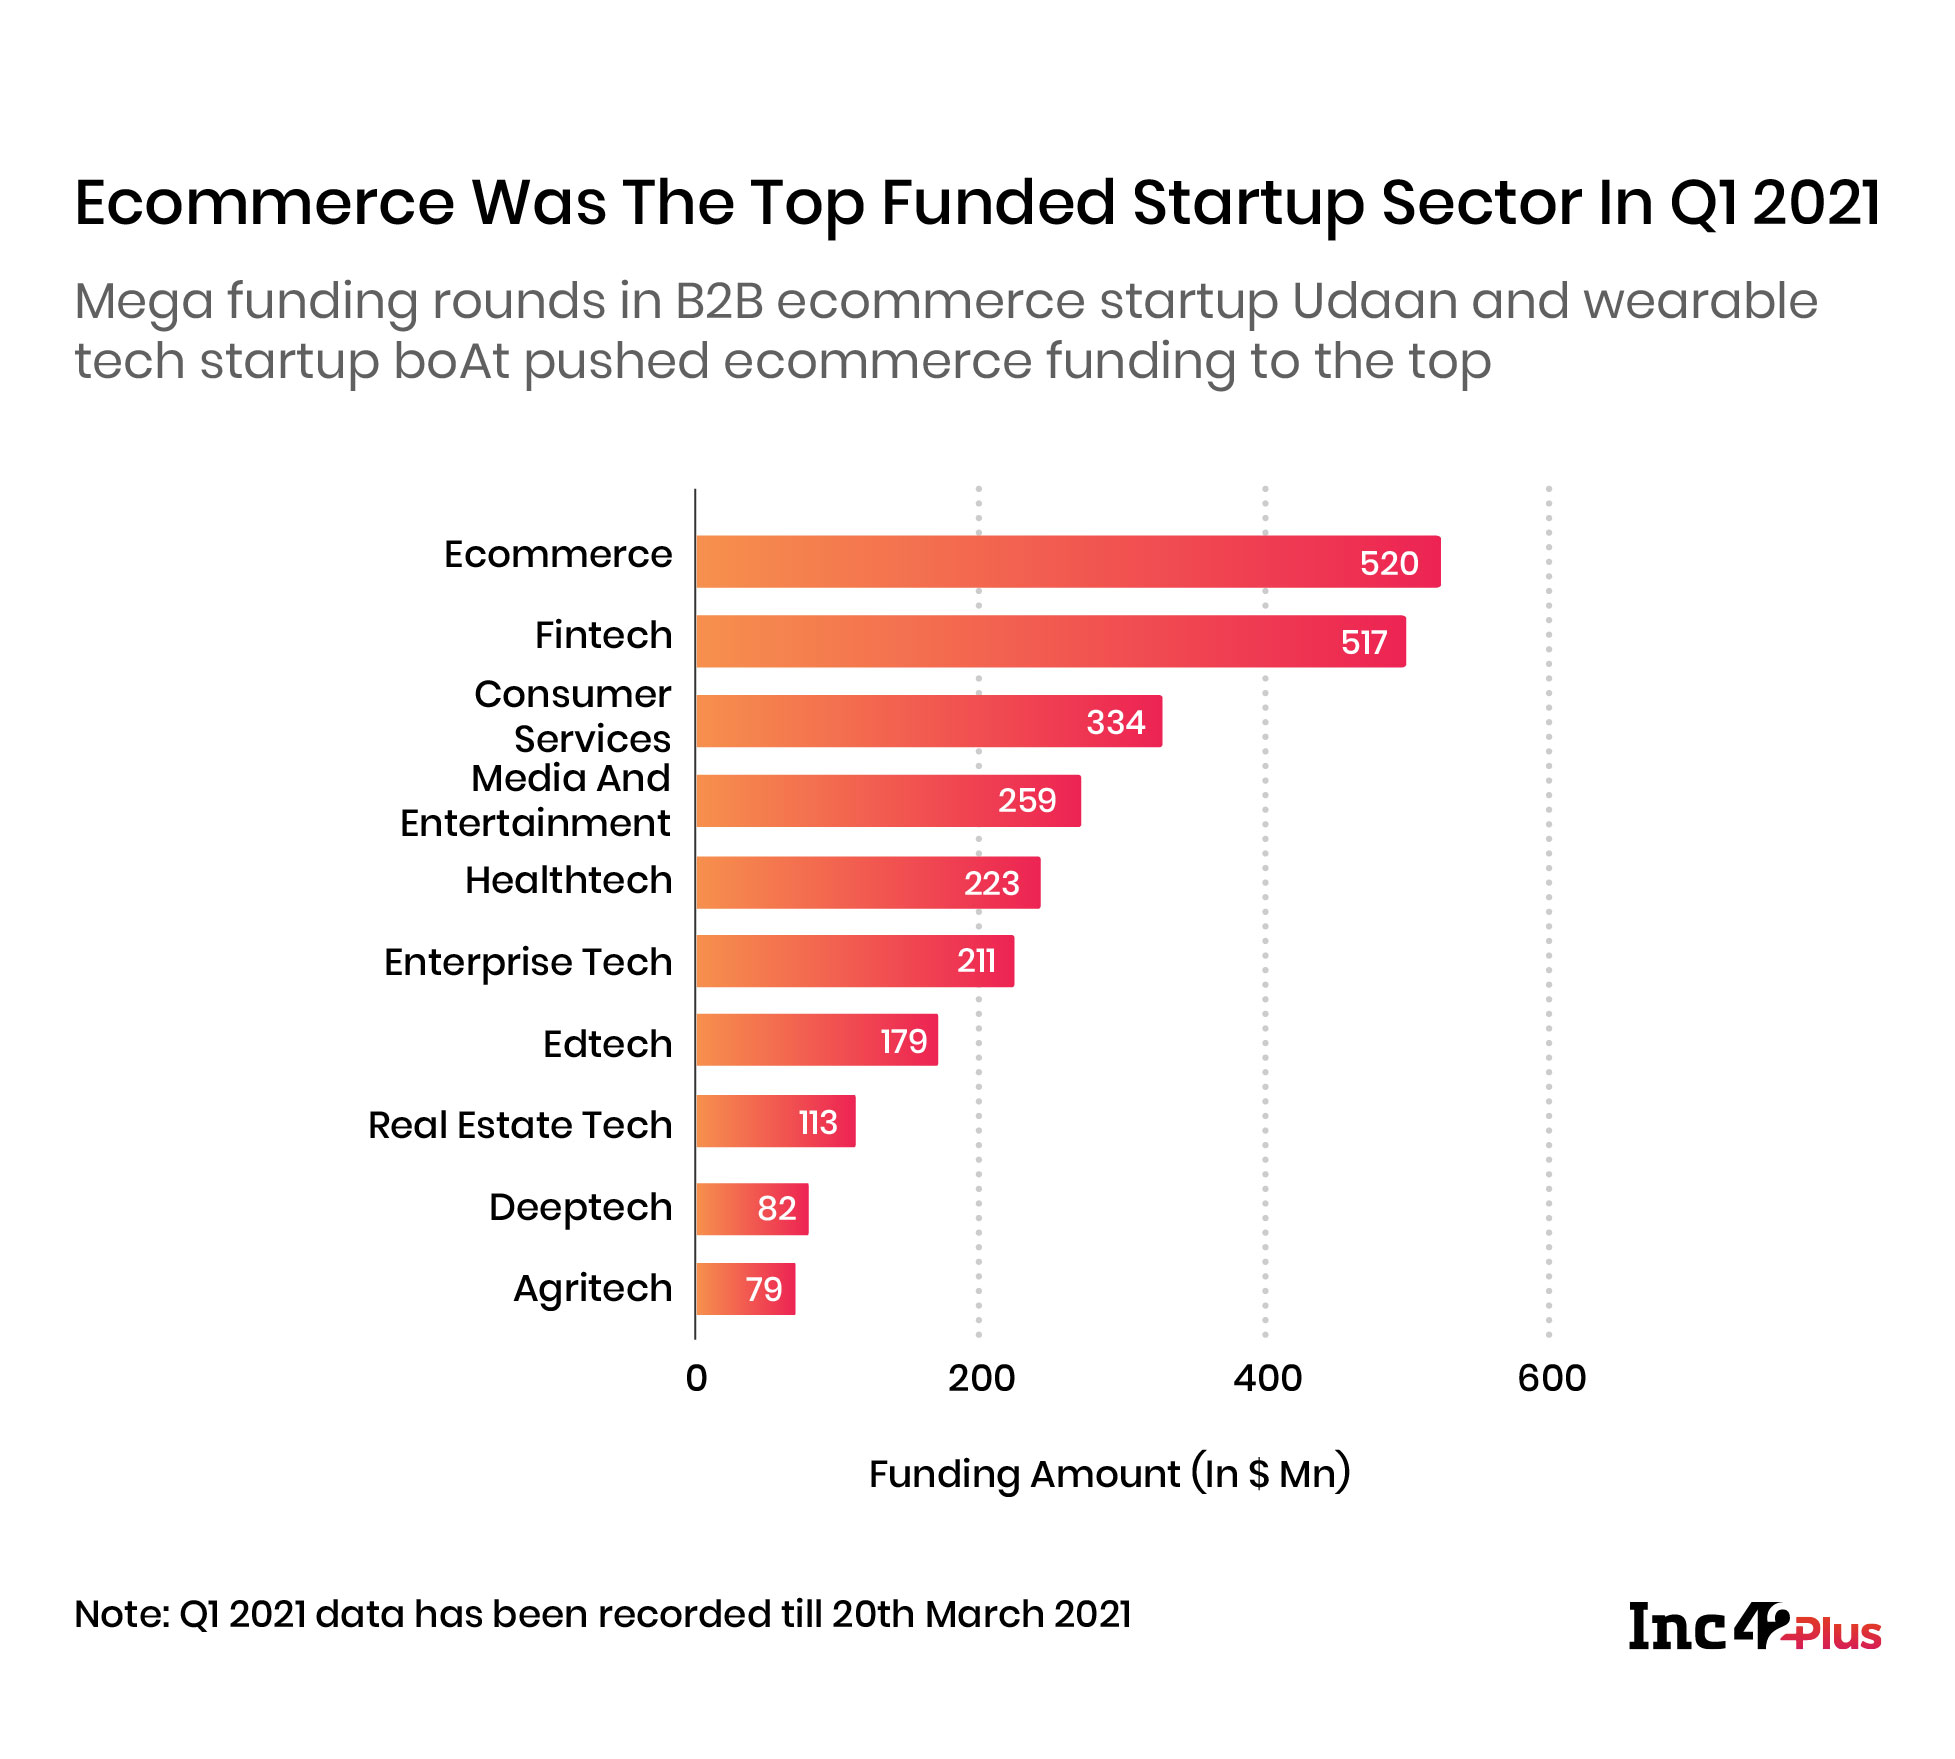 Ecommerce Was The Top Funded Startup Sector In Q1 2021